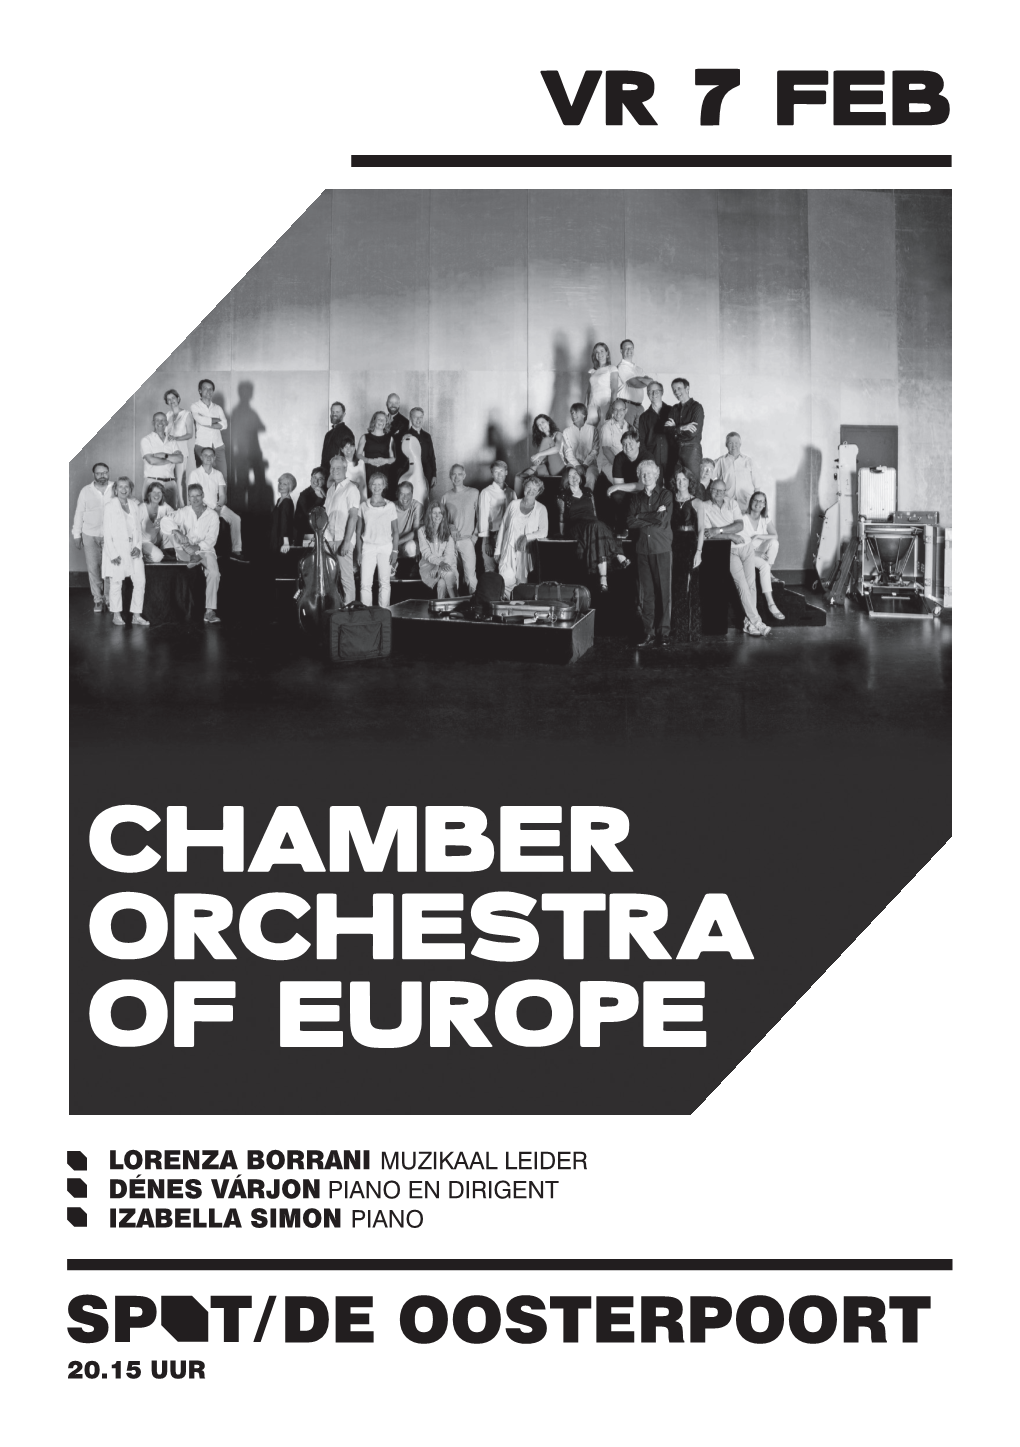 Programma Chamber Orchestra of Europe.Indd